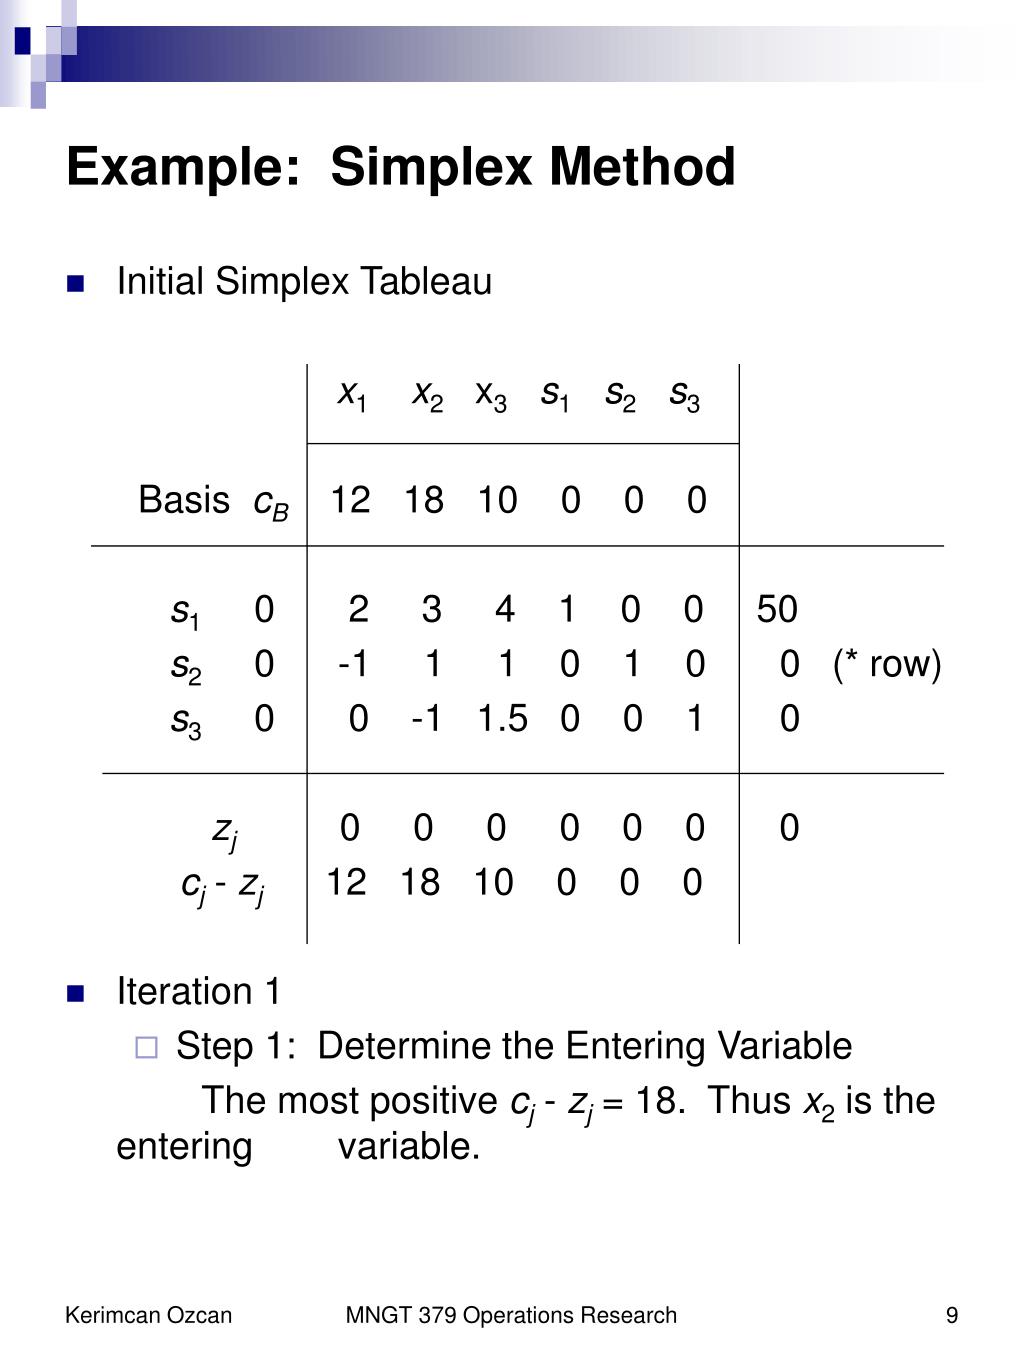 how can we solve linear programming problem using simplex method